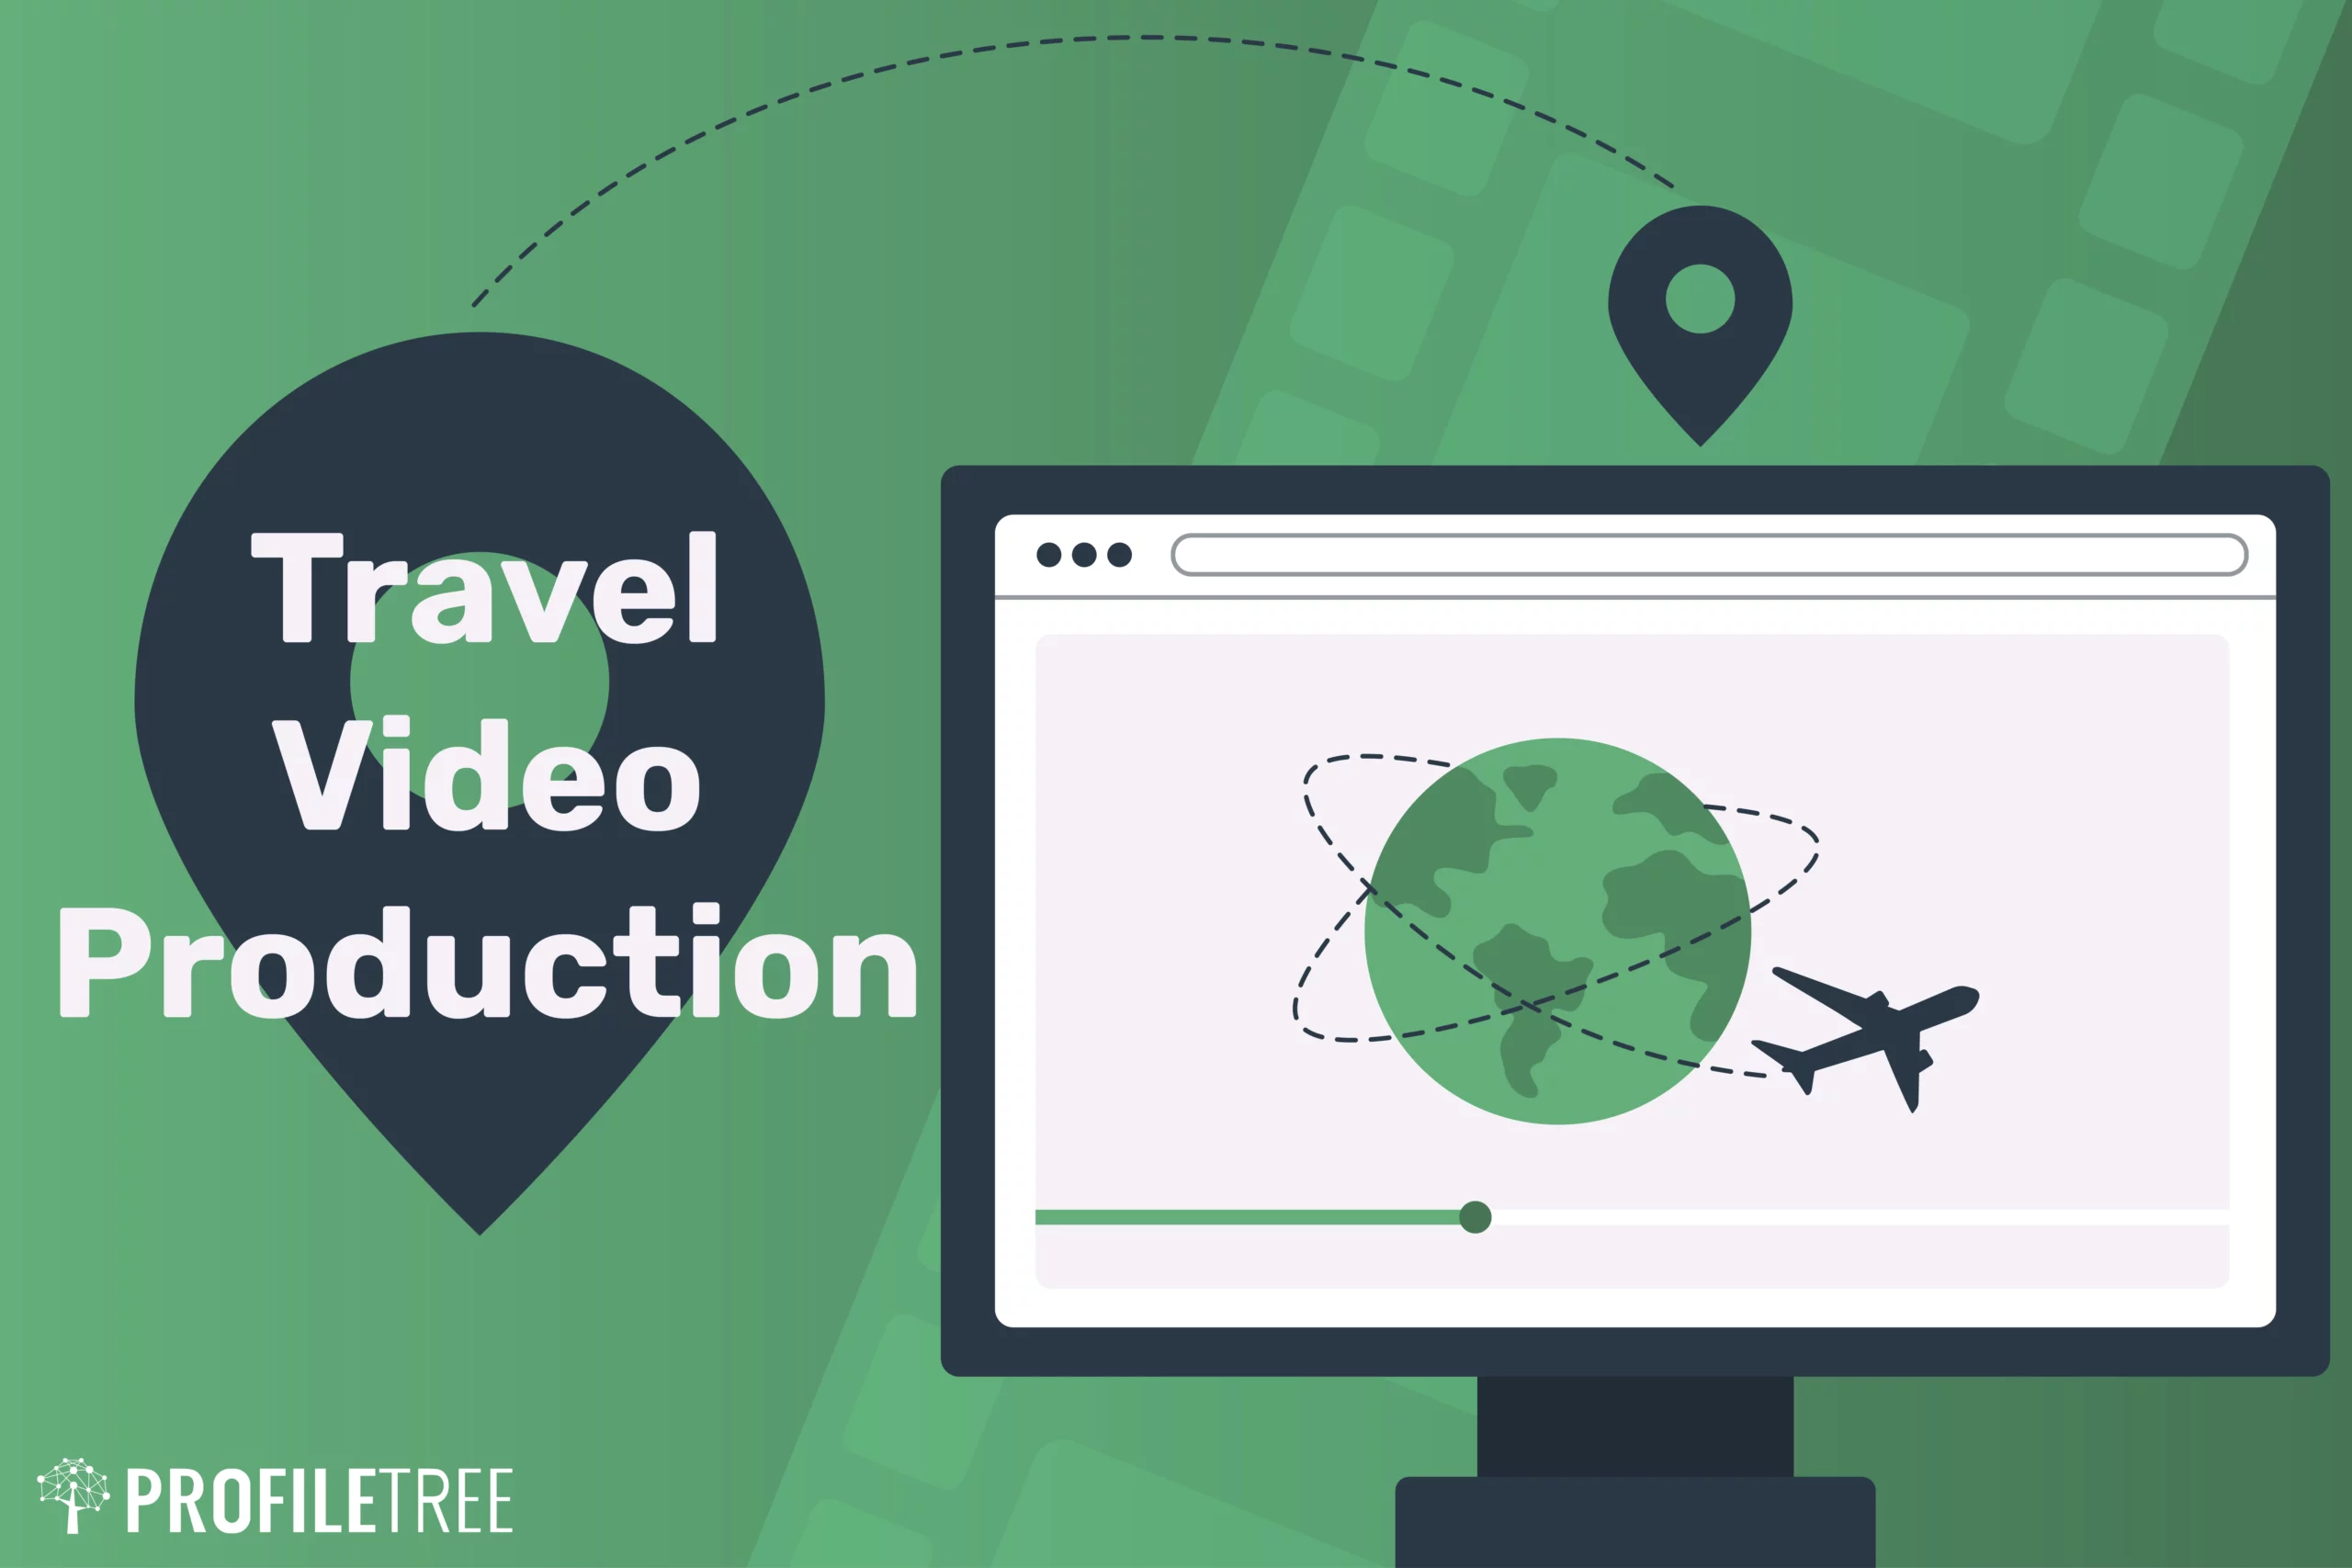 Travel Video Production